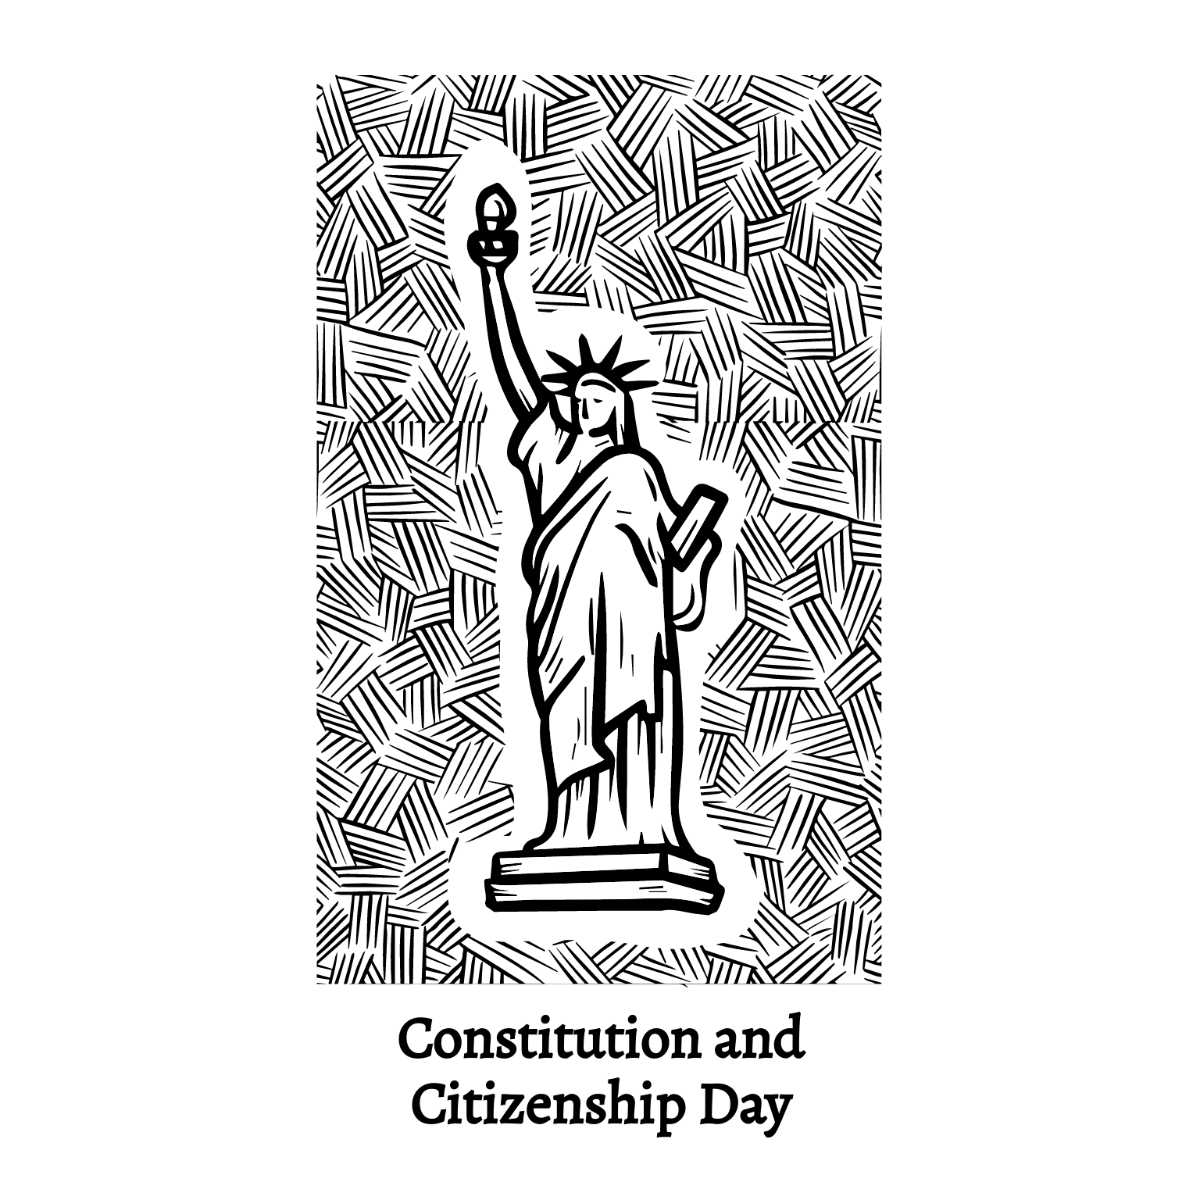 Free Constitution and Citizenship Day Sketch Vector Template